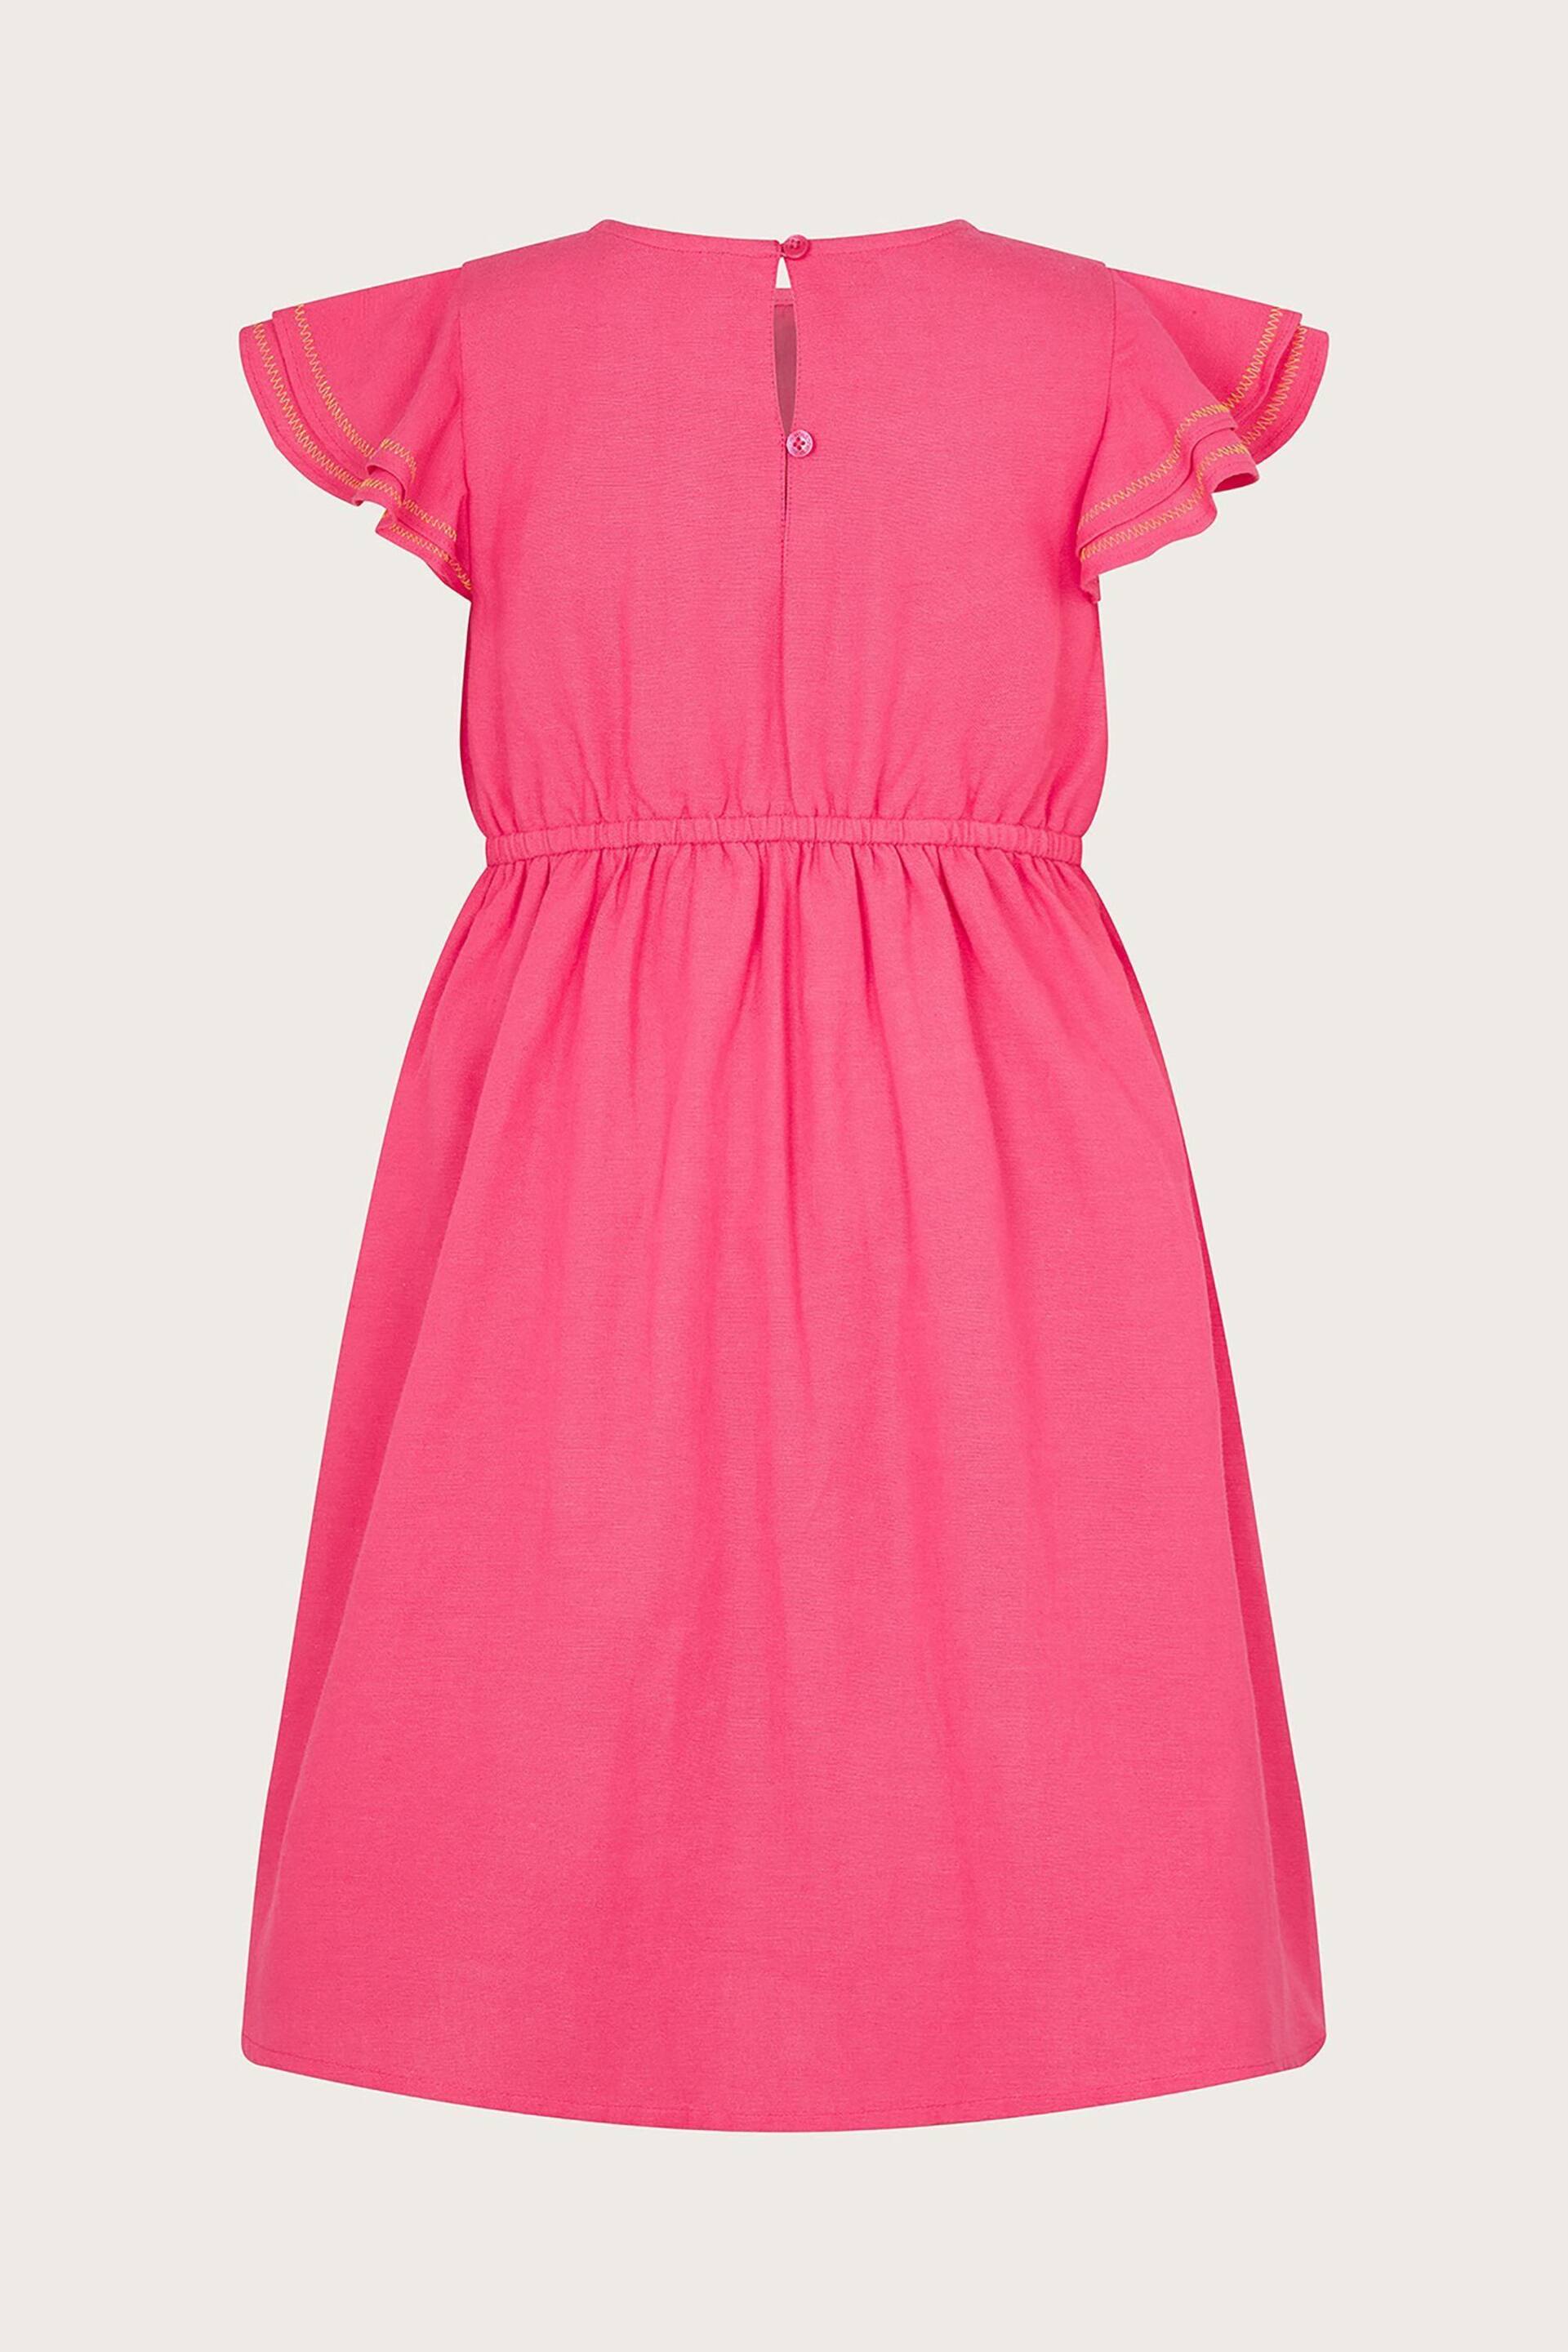 Monsoon Pink Embroidered Skater Dress - Image 2 of 3